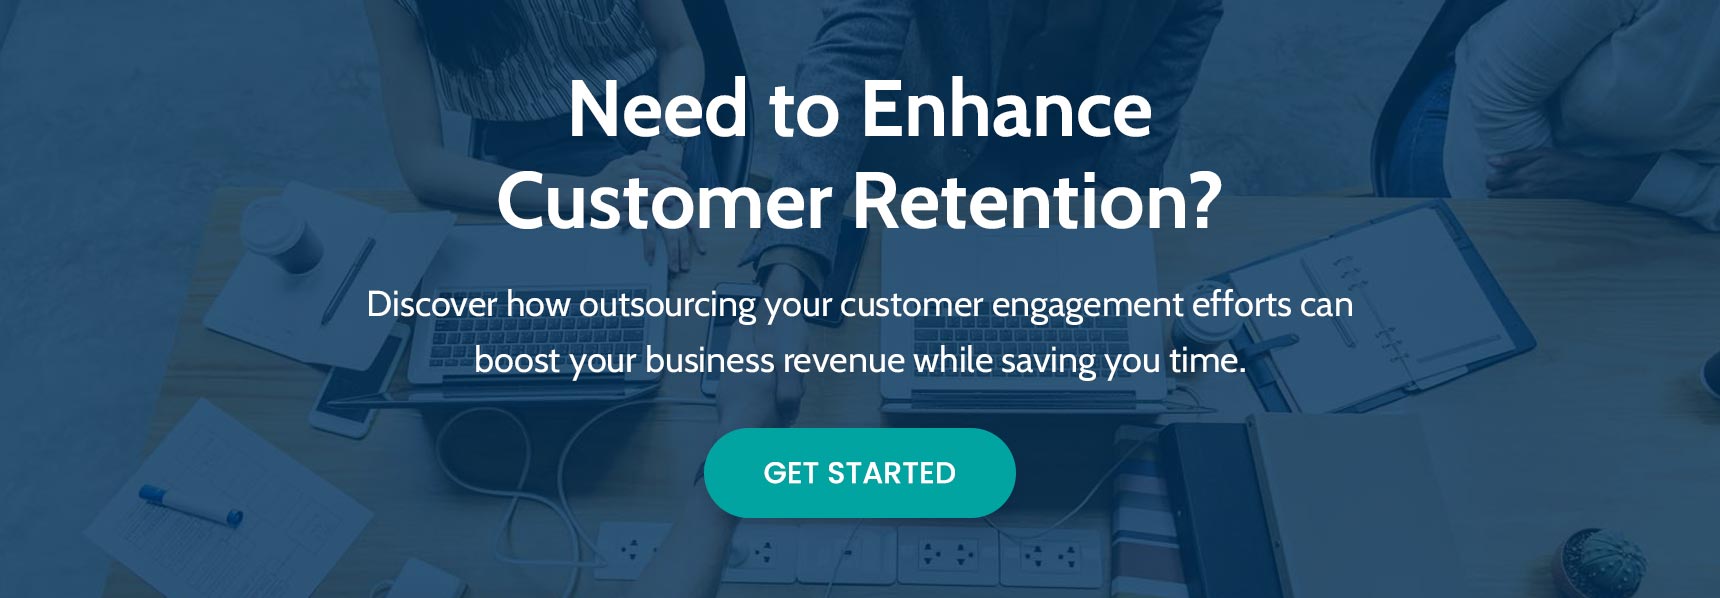 need to enhance customer retention? discover how outsourcing your customer engagement efforts can boost your business revenue while saving you time